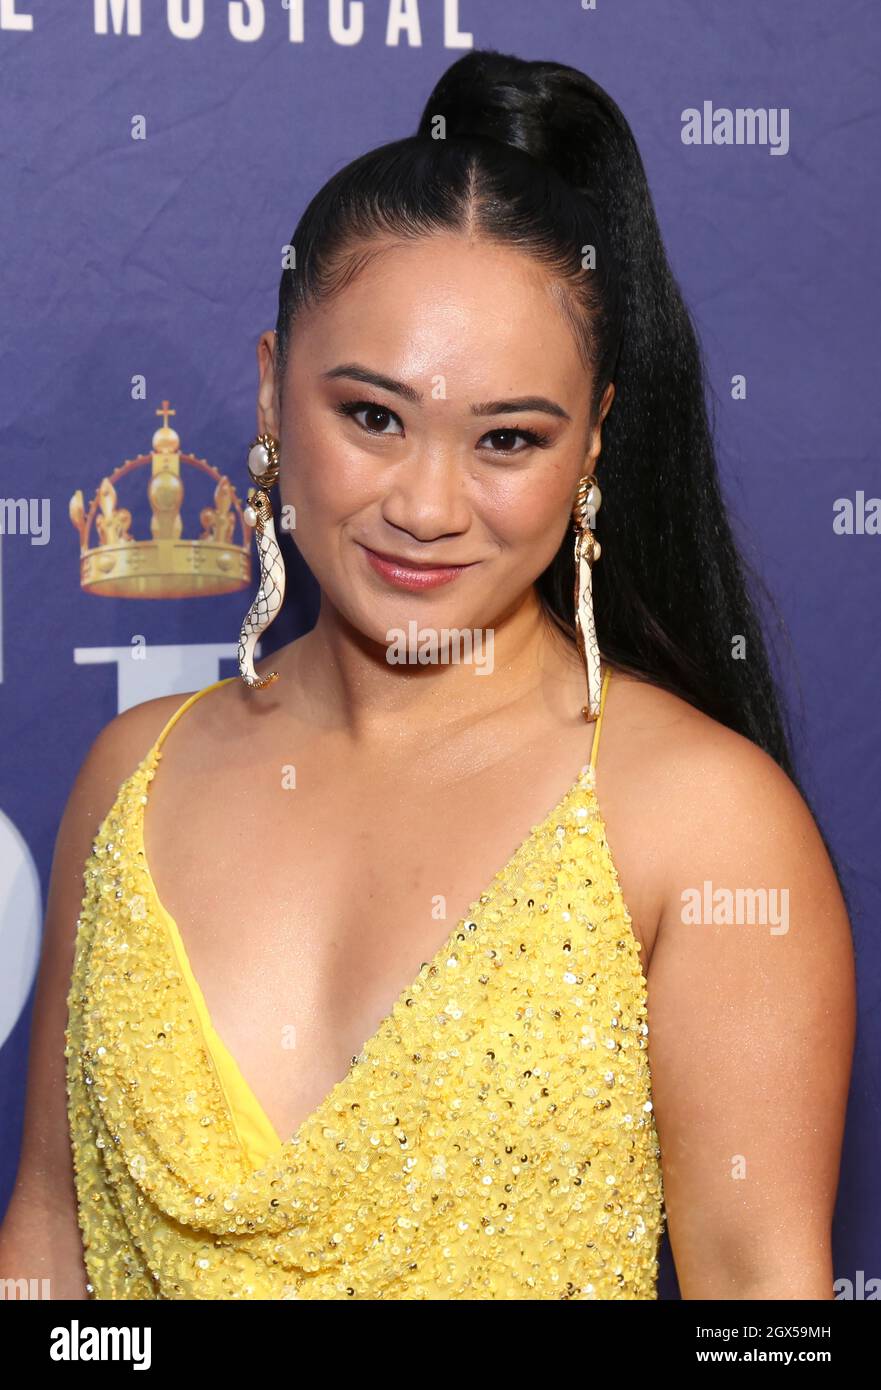 New York, NY, USA. 3rd Oct, 2021. Andrea Macasaet arrives at the opening night party for Six The Musical, held at Pier 60, on October 3, 2021, in New York City. Credit: Joseph Marzullo/Media Punch/Alamy Live News Stock Photo